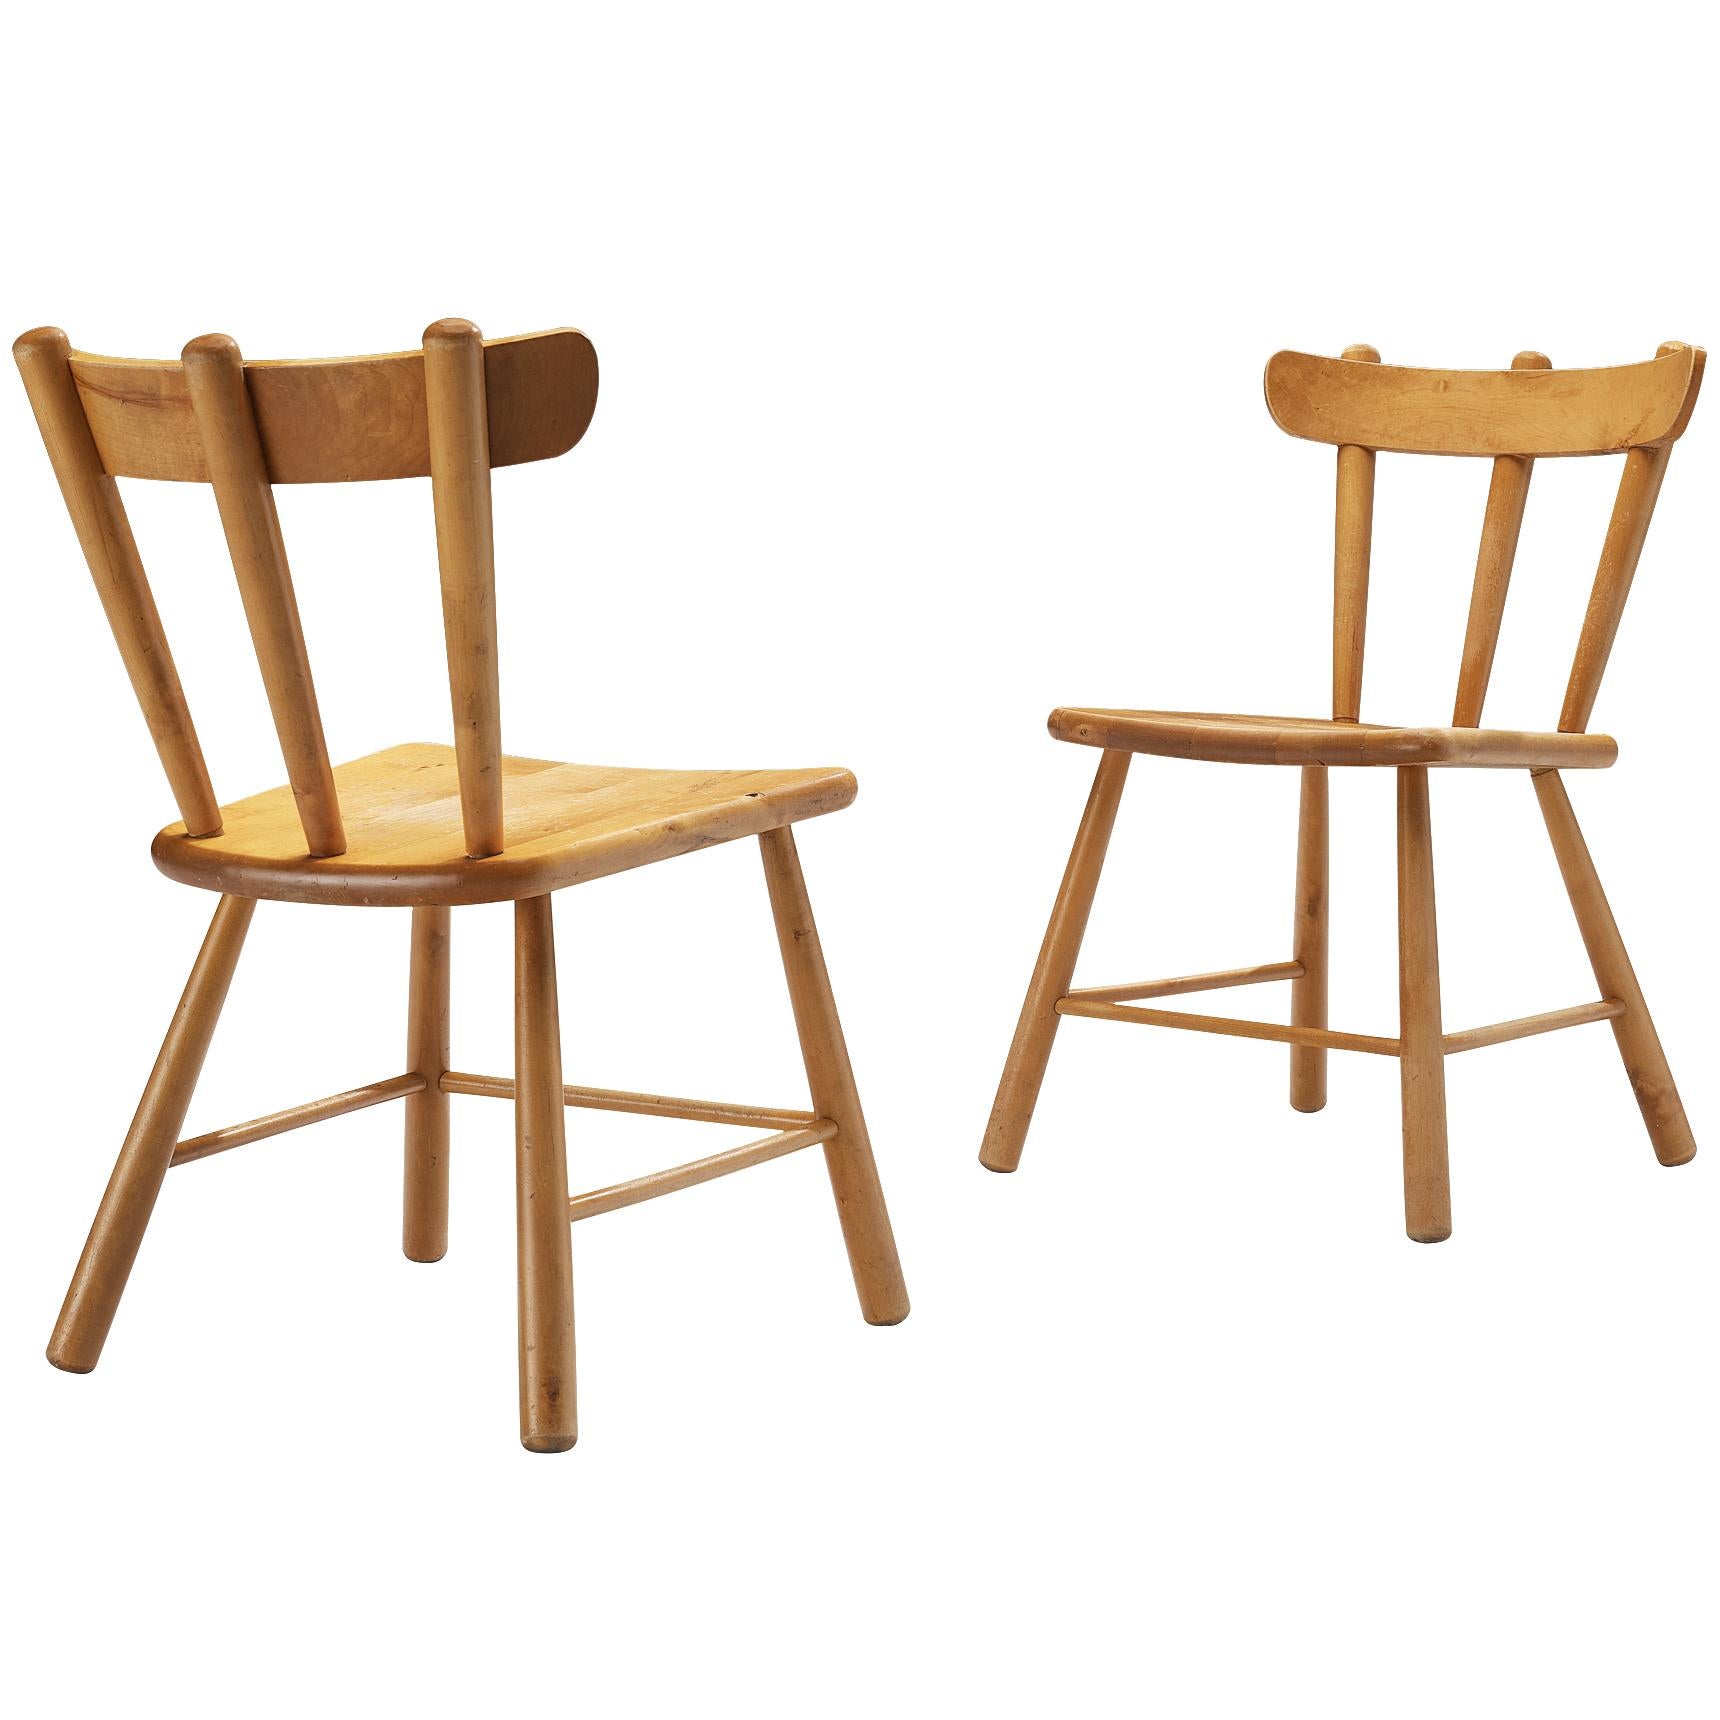 Pair of Scandinavian Spindle Chairs in Birch